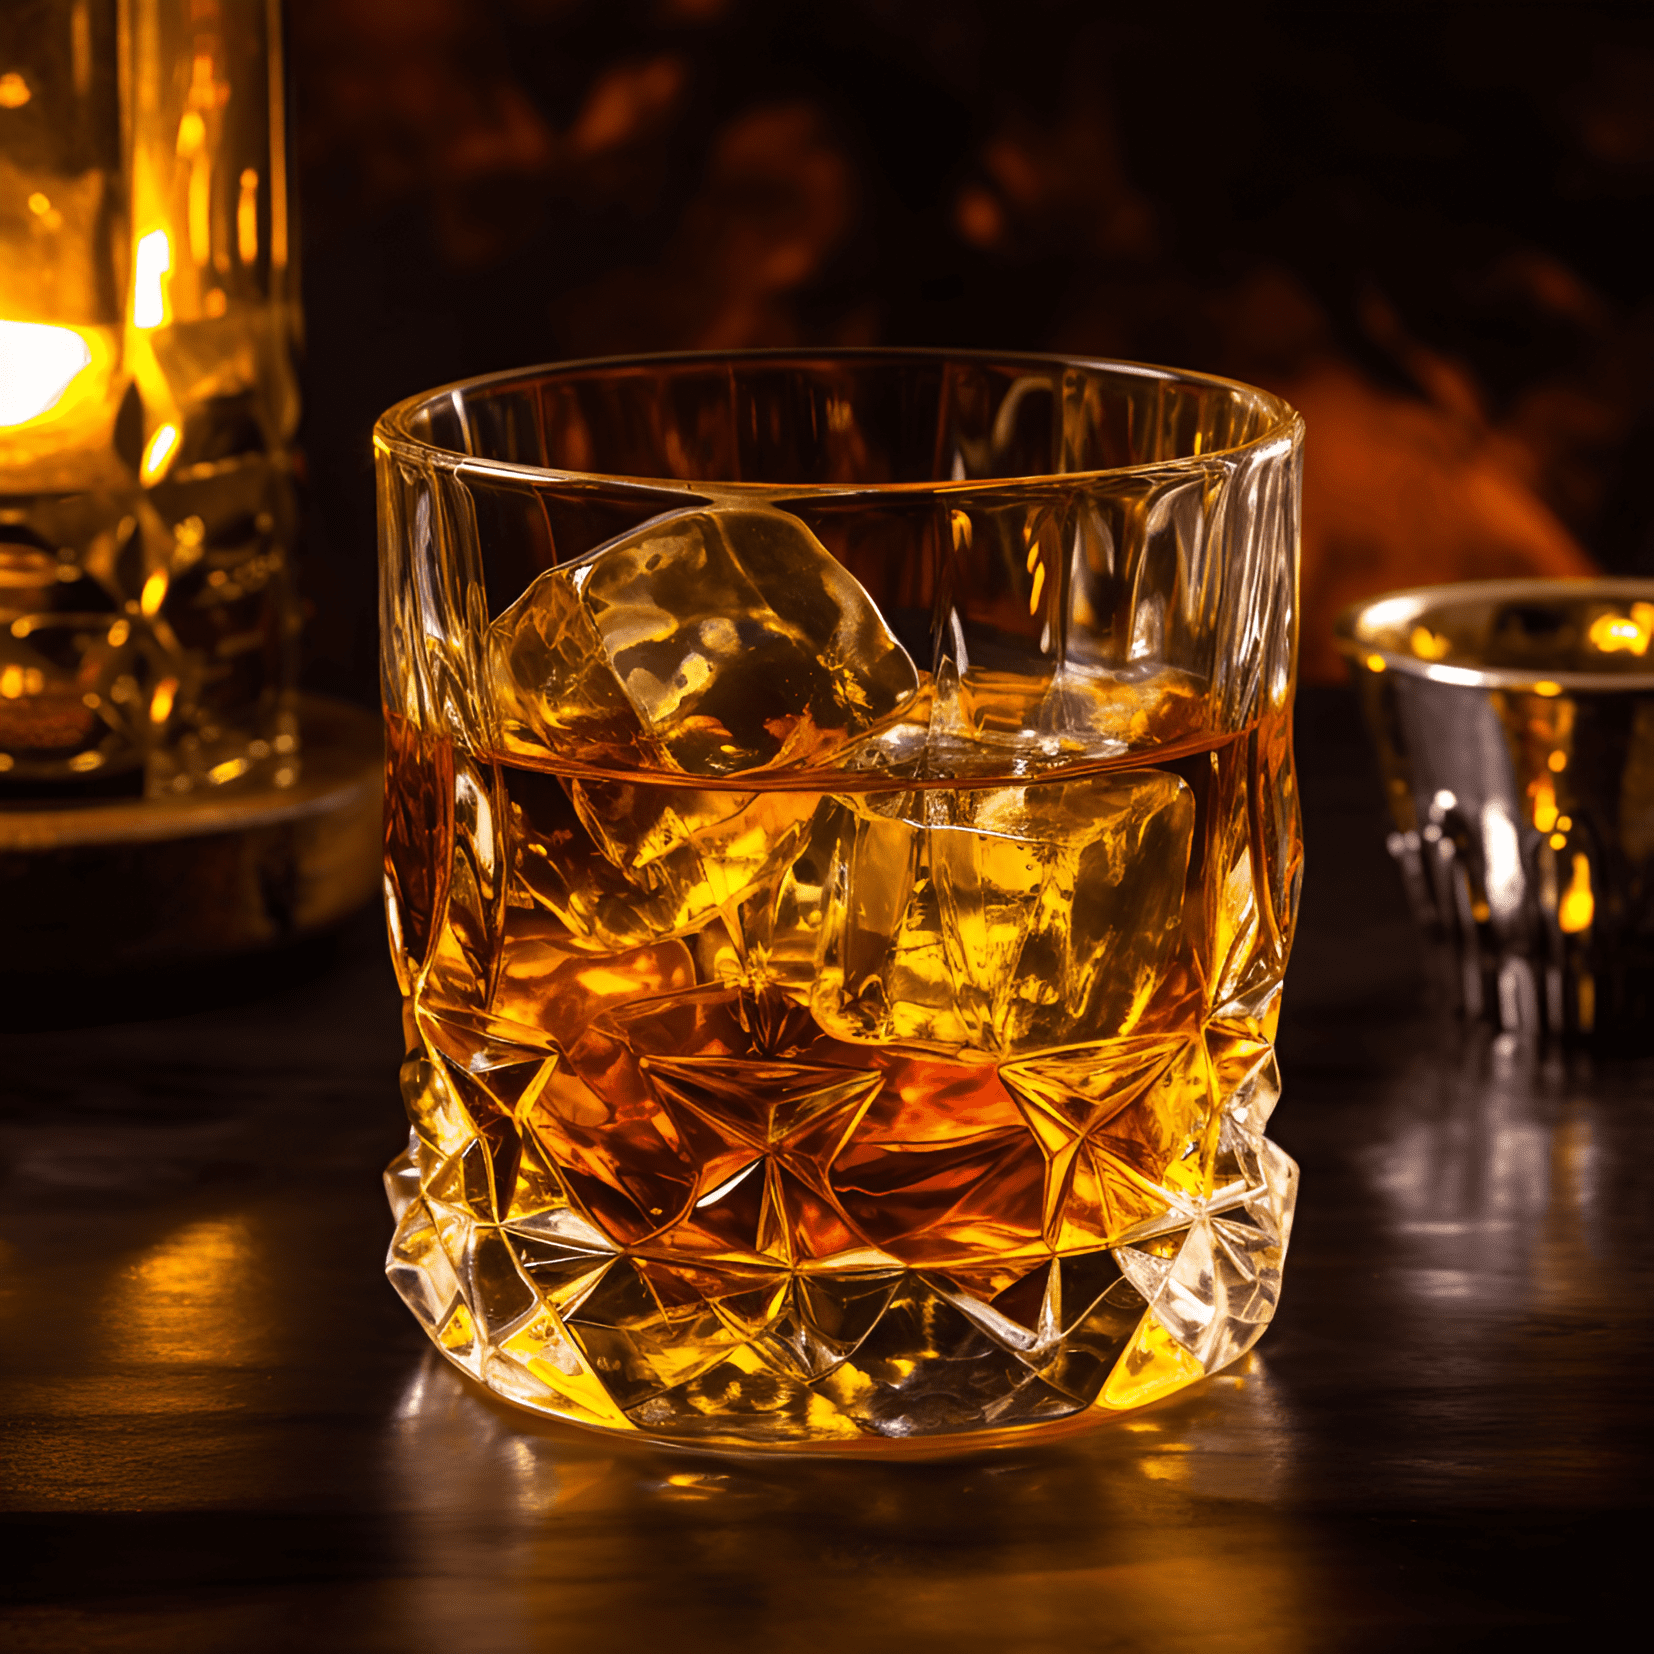 Godfather Cocktail Recipe - The Godfather cocktail has a rich, smooth, and slightly sweet taste with a hint of nuttiness from the amaretto. It is a strong and warming drink, perfect for sipping slowly.